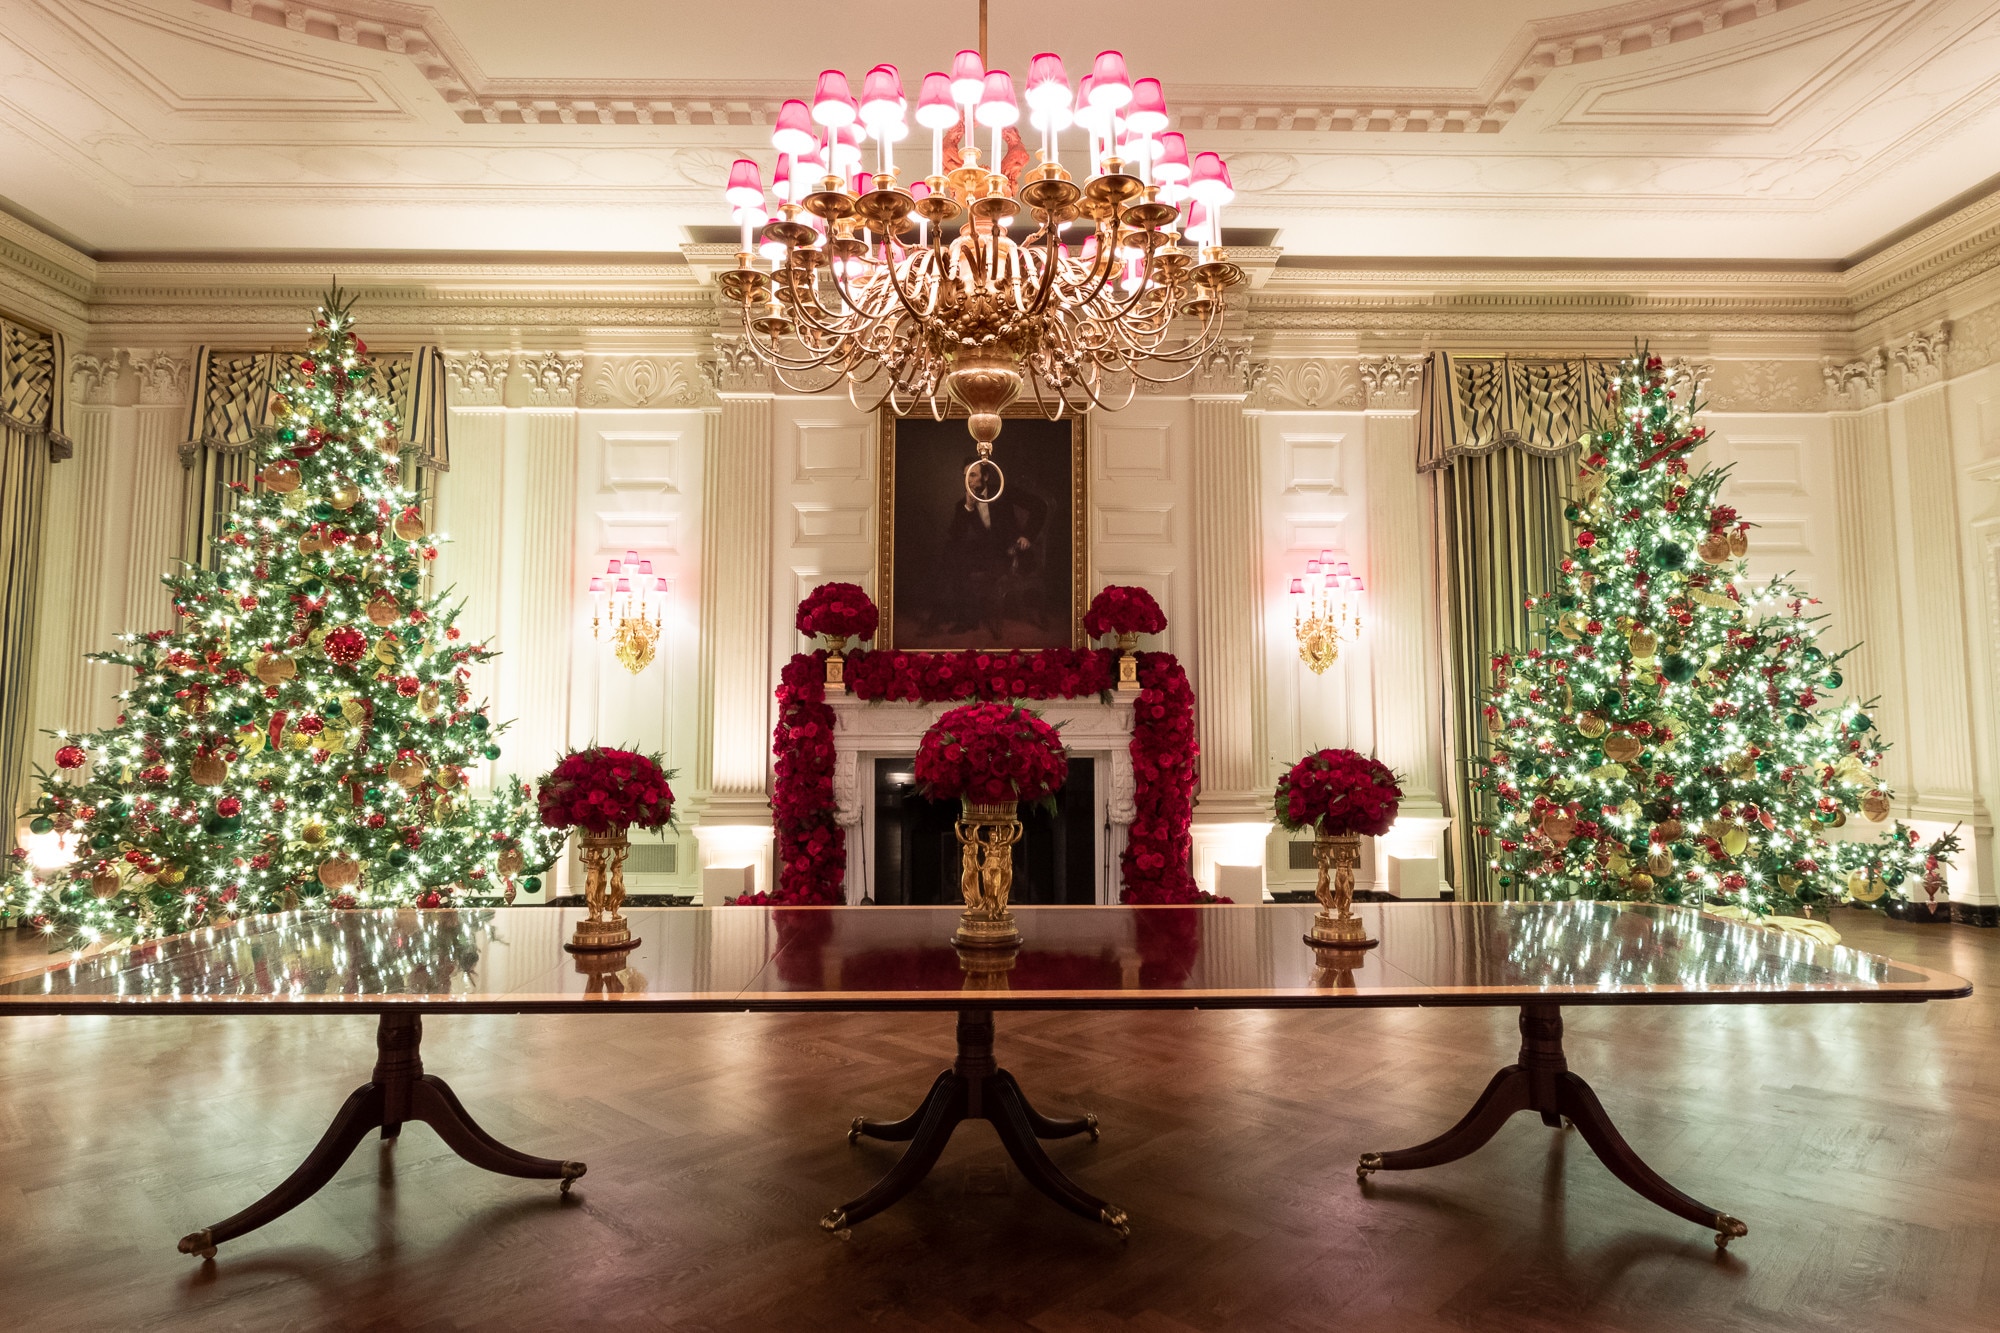 State Dining Room of the White House with Christmas decorations.